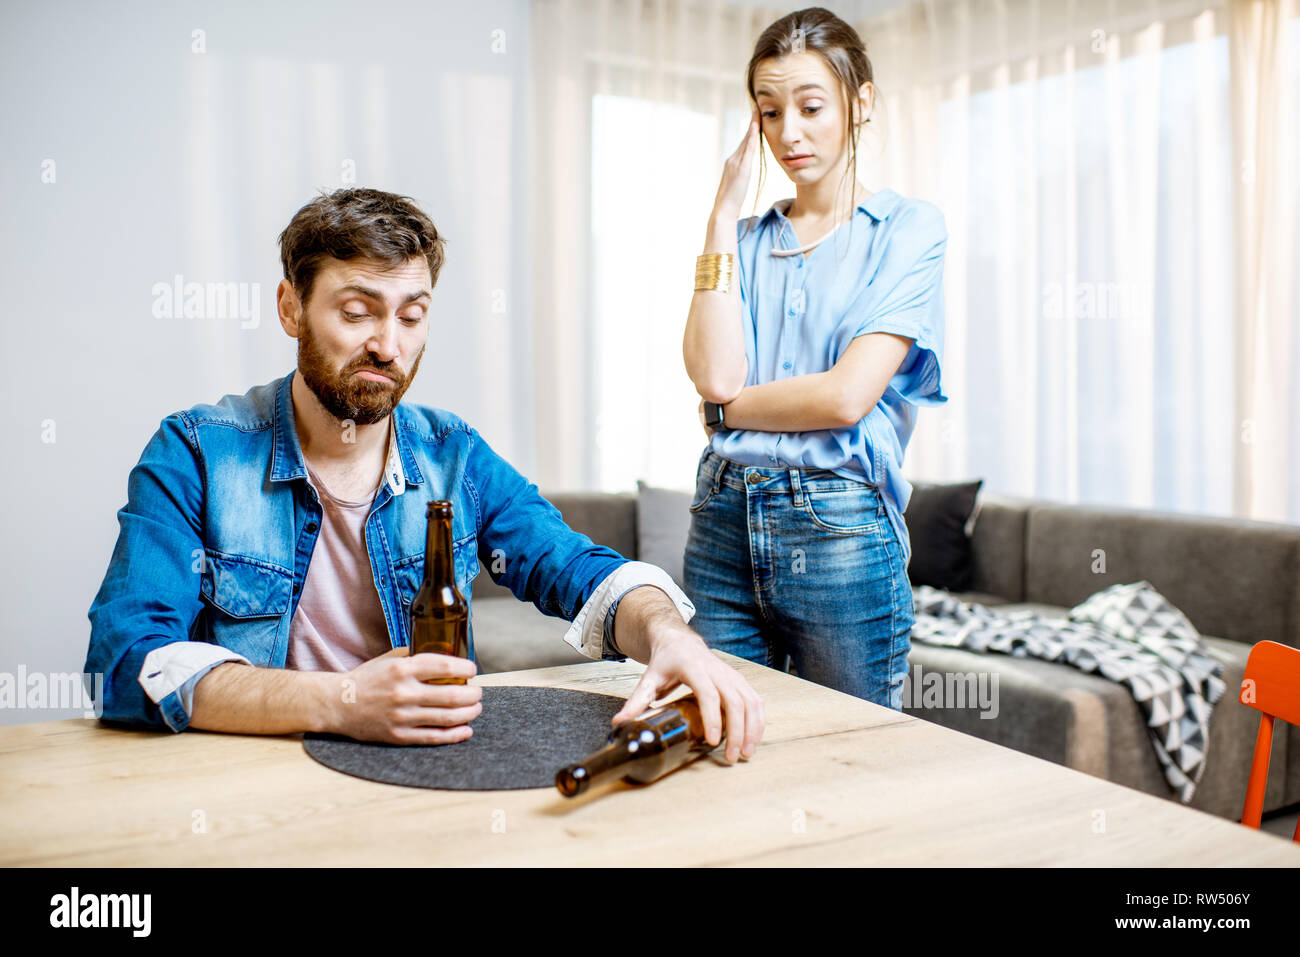 Drunk man suffering from alcoholism feeling depressed sitting at home with young woman in despair on the background Stock Photo